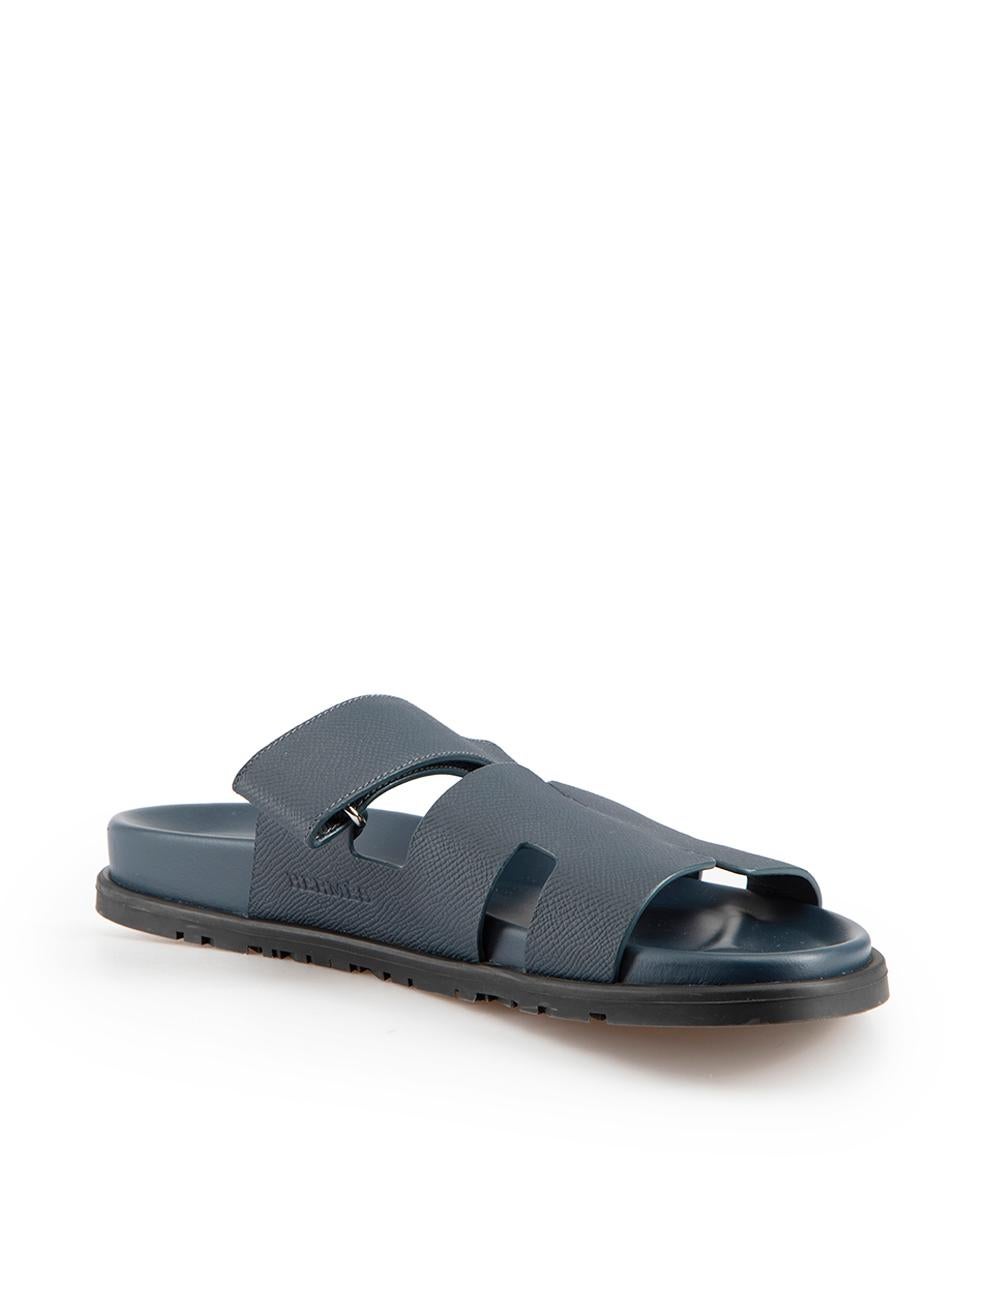 CONDITION is Very good. Hardly any visible wear to sandals is evident on this used Hermes designer resale item.
 
 Details
 Chypre
 Blue
 Leather
 Slides
 Open toe
 Velcro fastening
 Made in Italy

 Composition
 EXTERIOR: Leather
 INTERIOR: